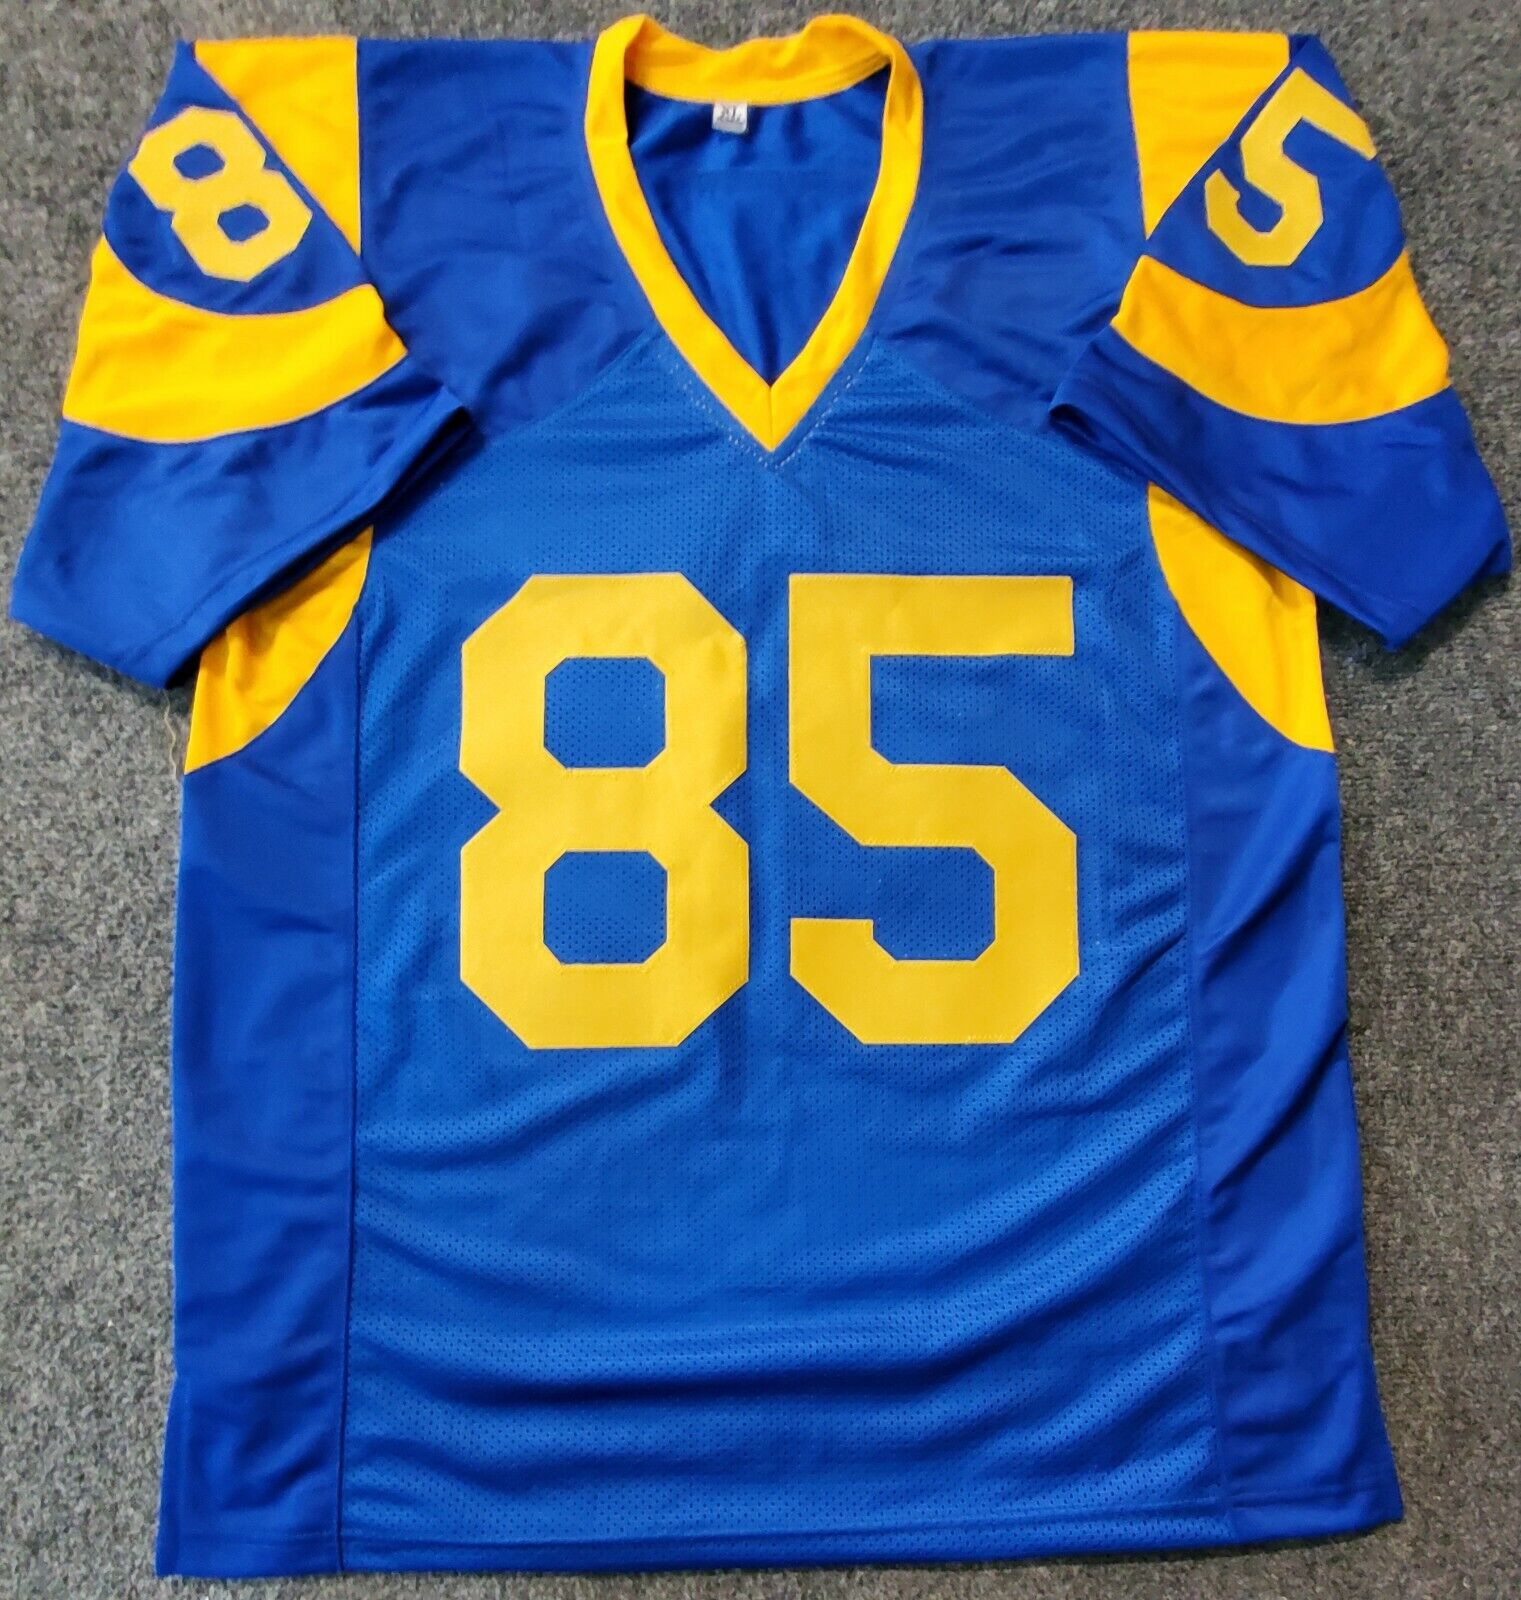 MVP Authentics Los Angeles Rams Jack Youngblood Autographed Signed Inscribed Jersey Jsa Coa 135 sports jersey framing , jersey framing